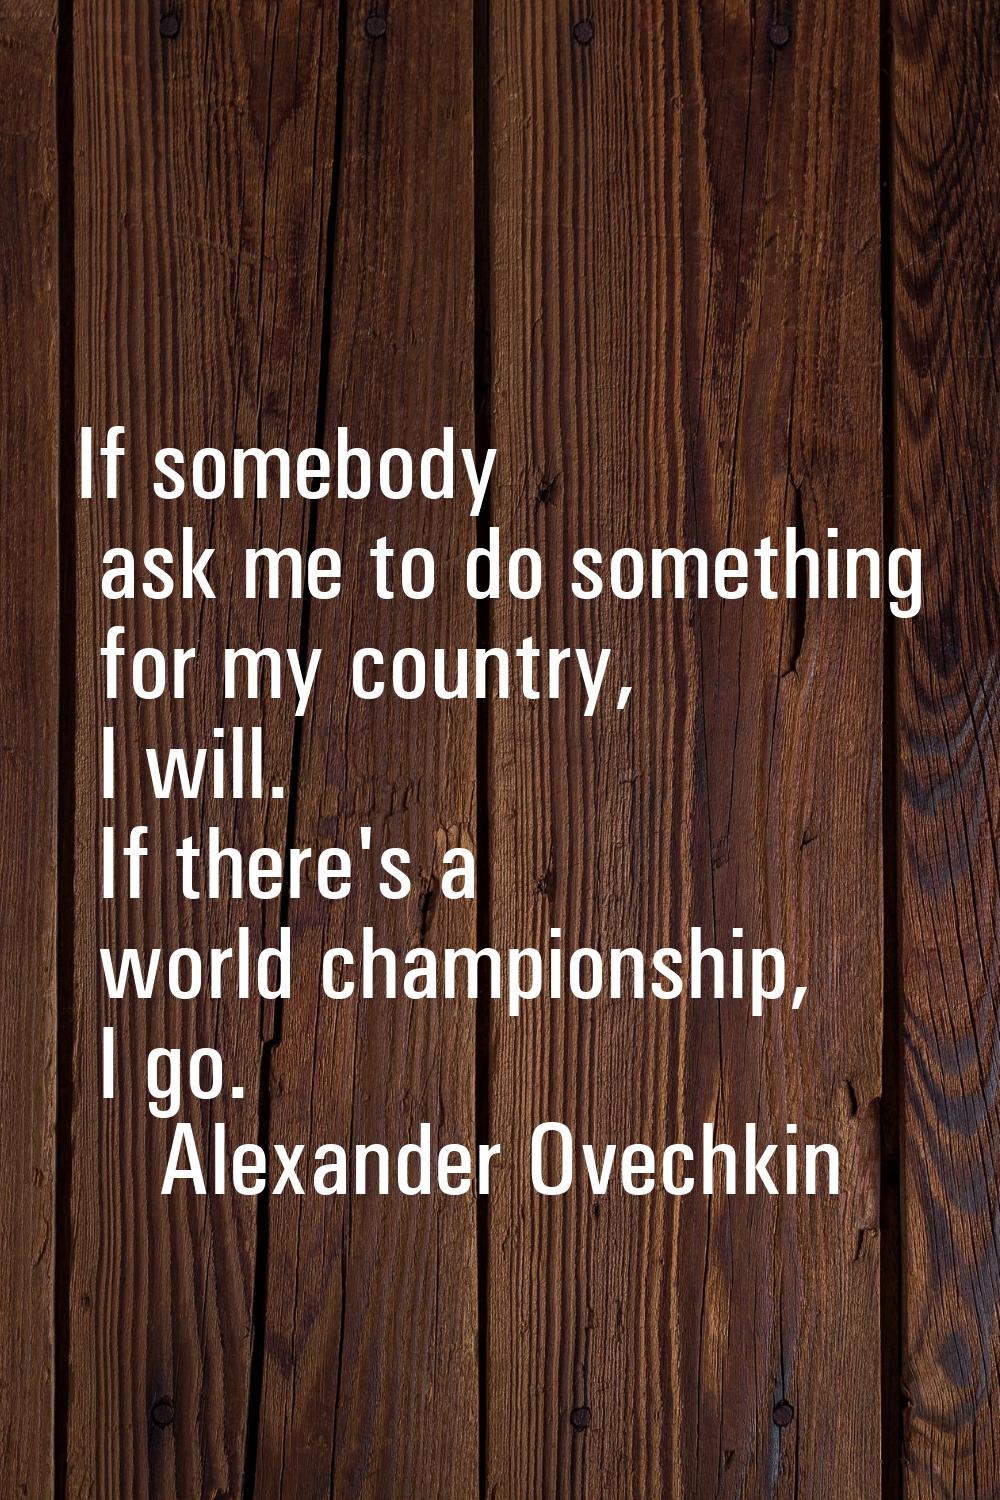 If somebody ask me to do something for my country, I will. If there's a world championship, I go.